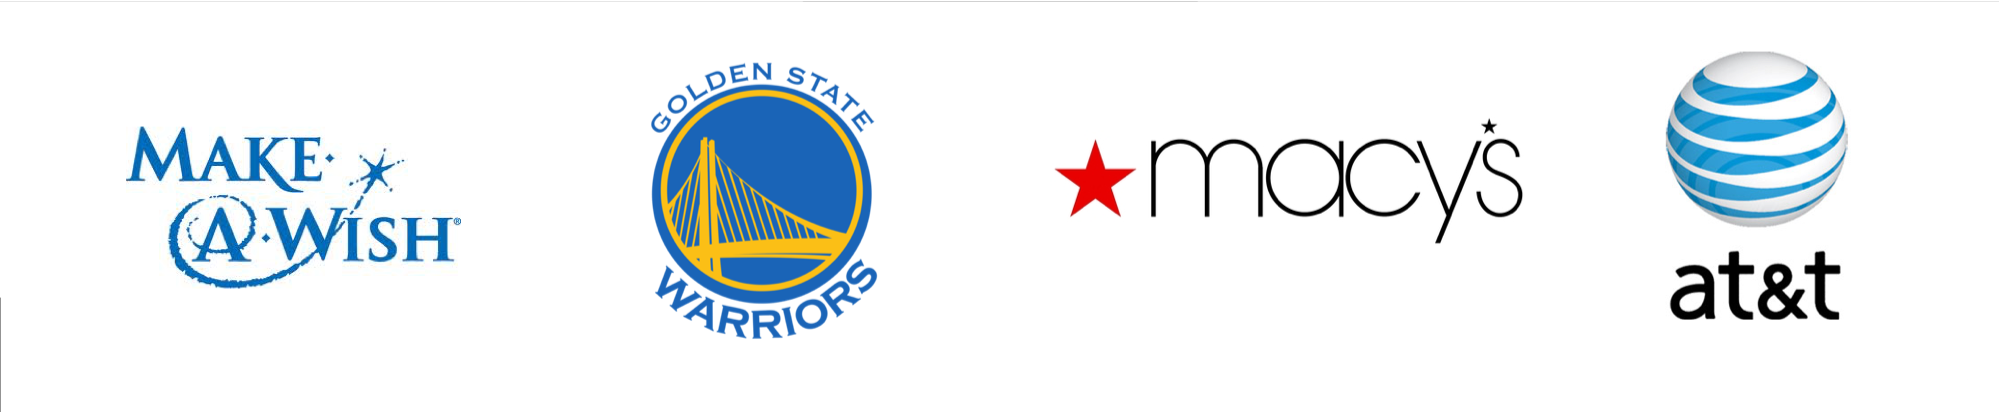 Make a Wish, Golden State Warriors, Macy's and AT&amp;T logos